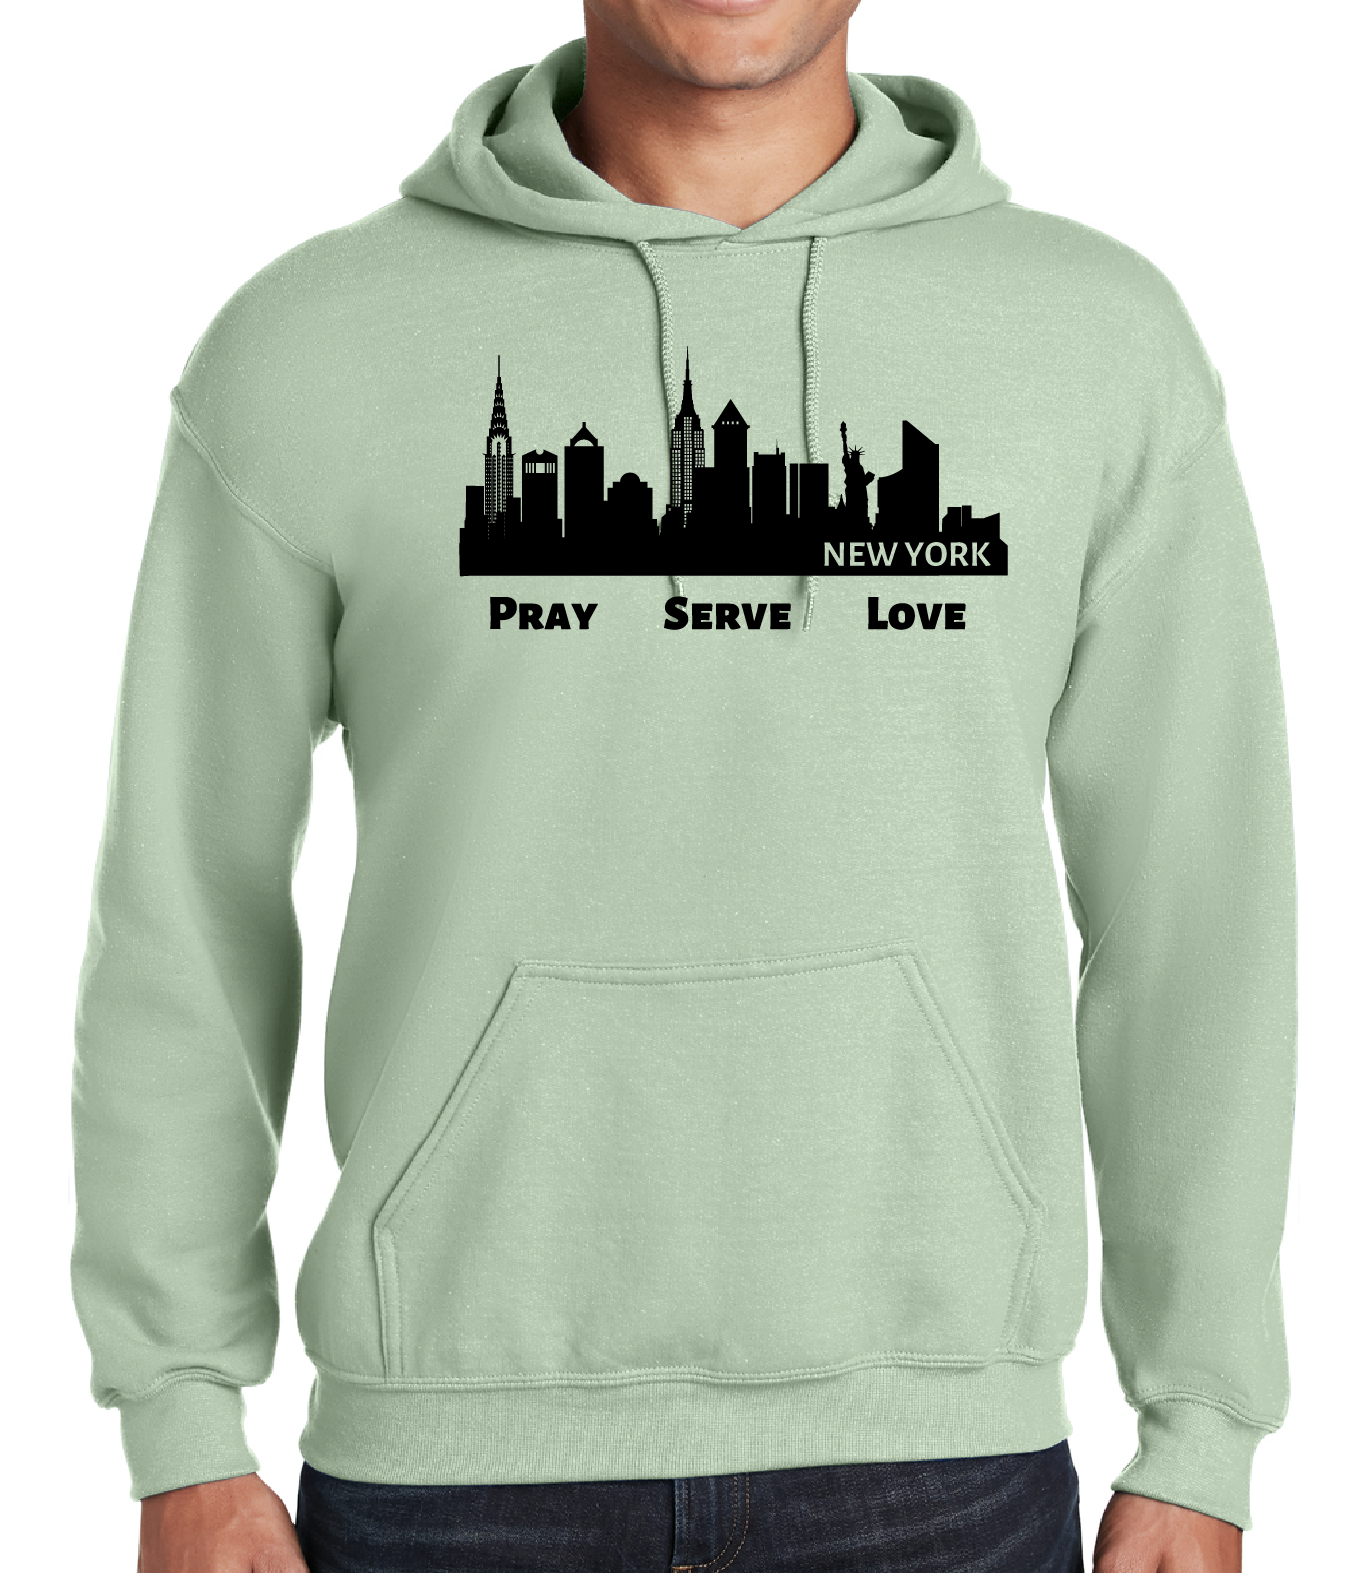 Pray, Serve, Love NYC Pullover Hoodie - Mint Green